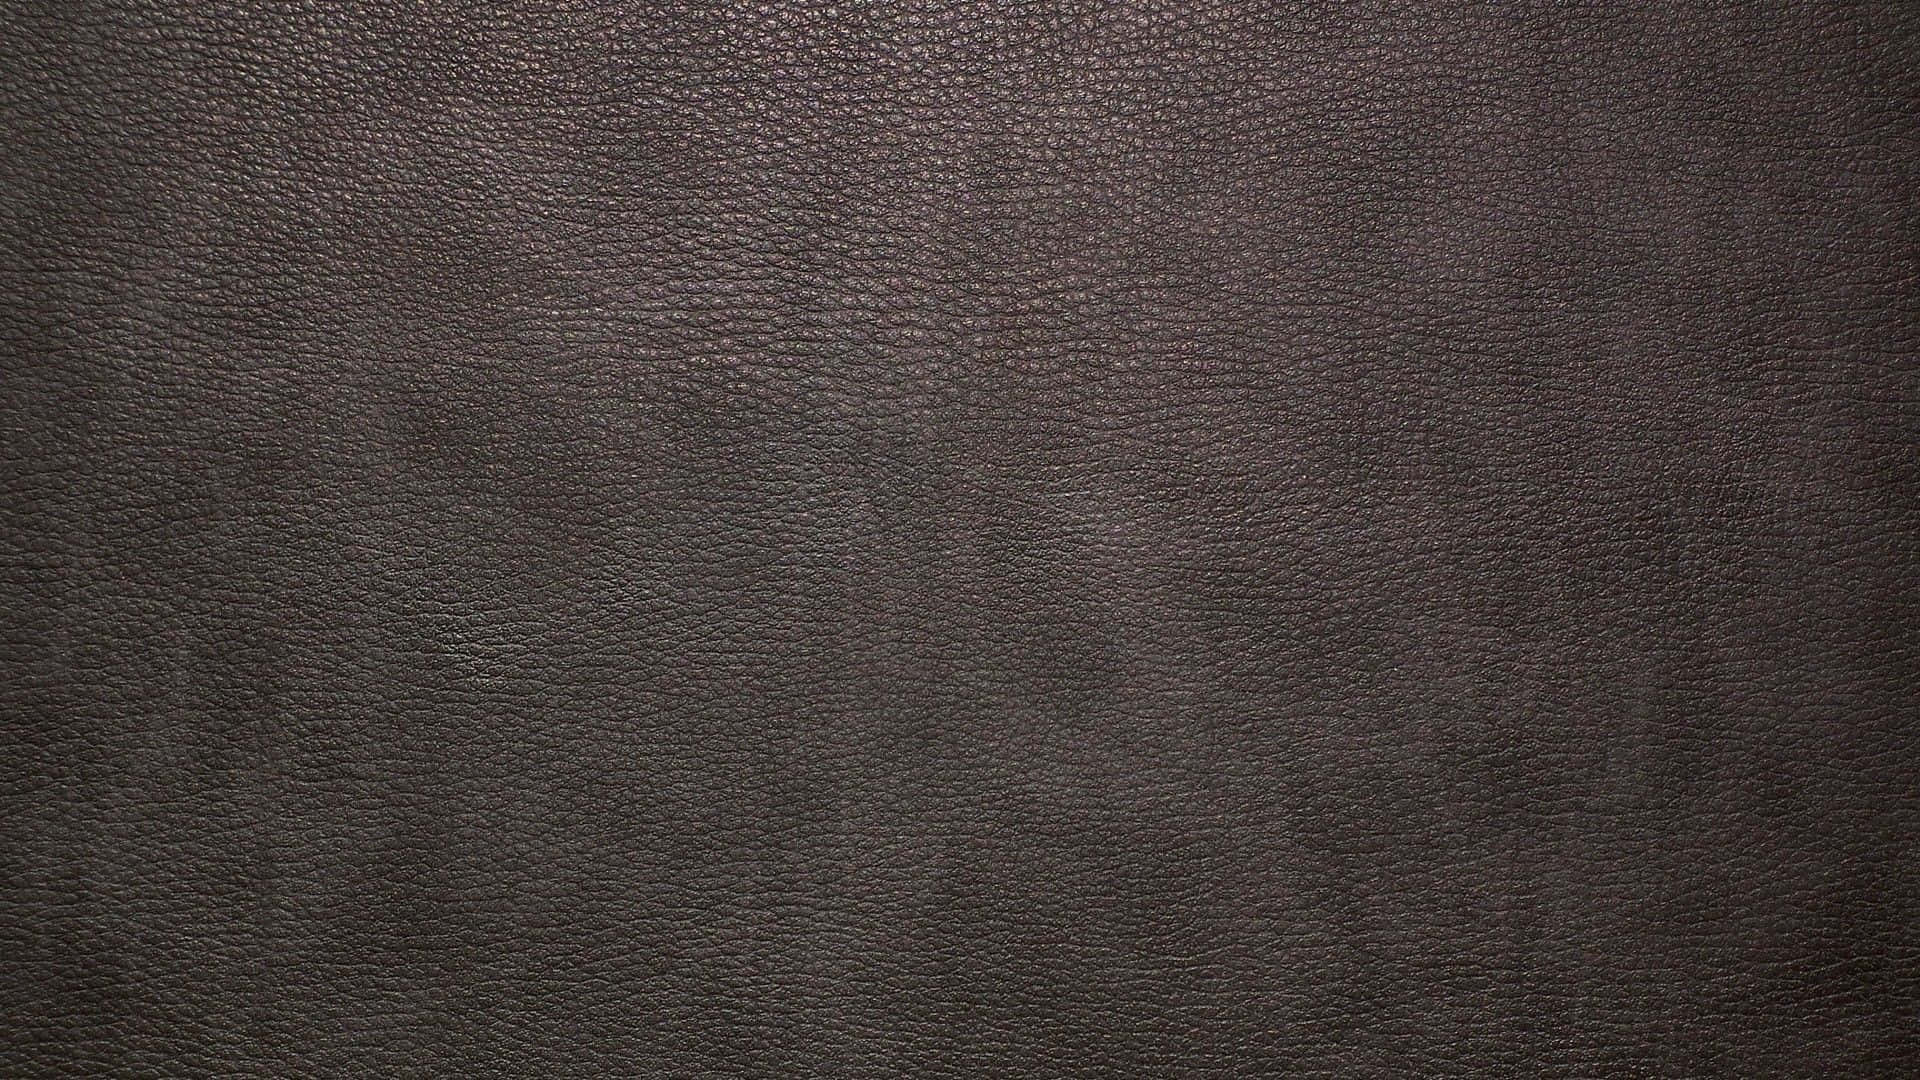 A Close Up Of A Dark Brown Leather Background